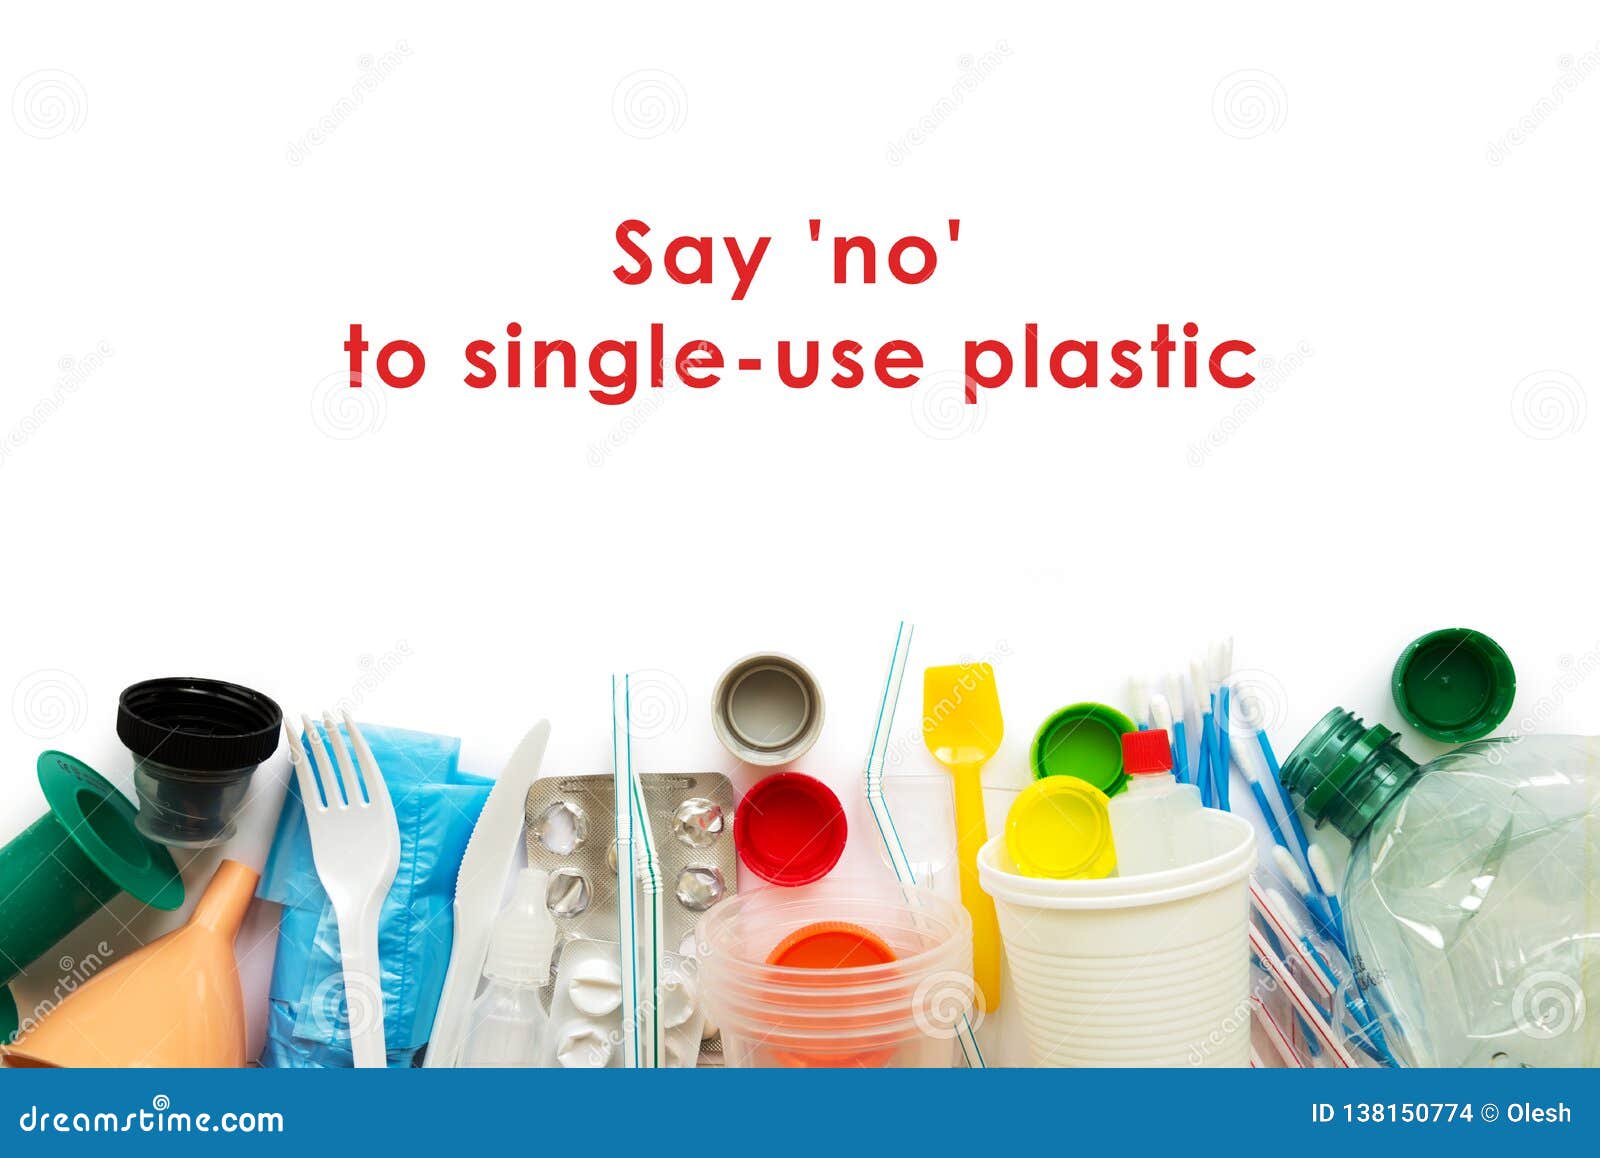 white single-use plastic and other plastic items on a white background